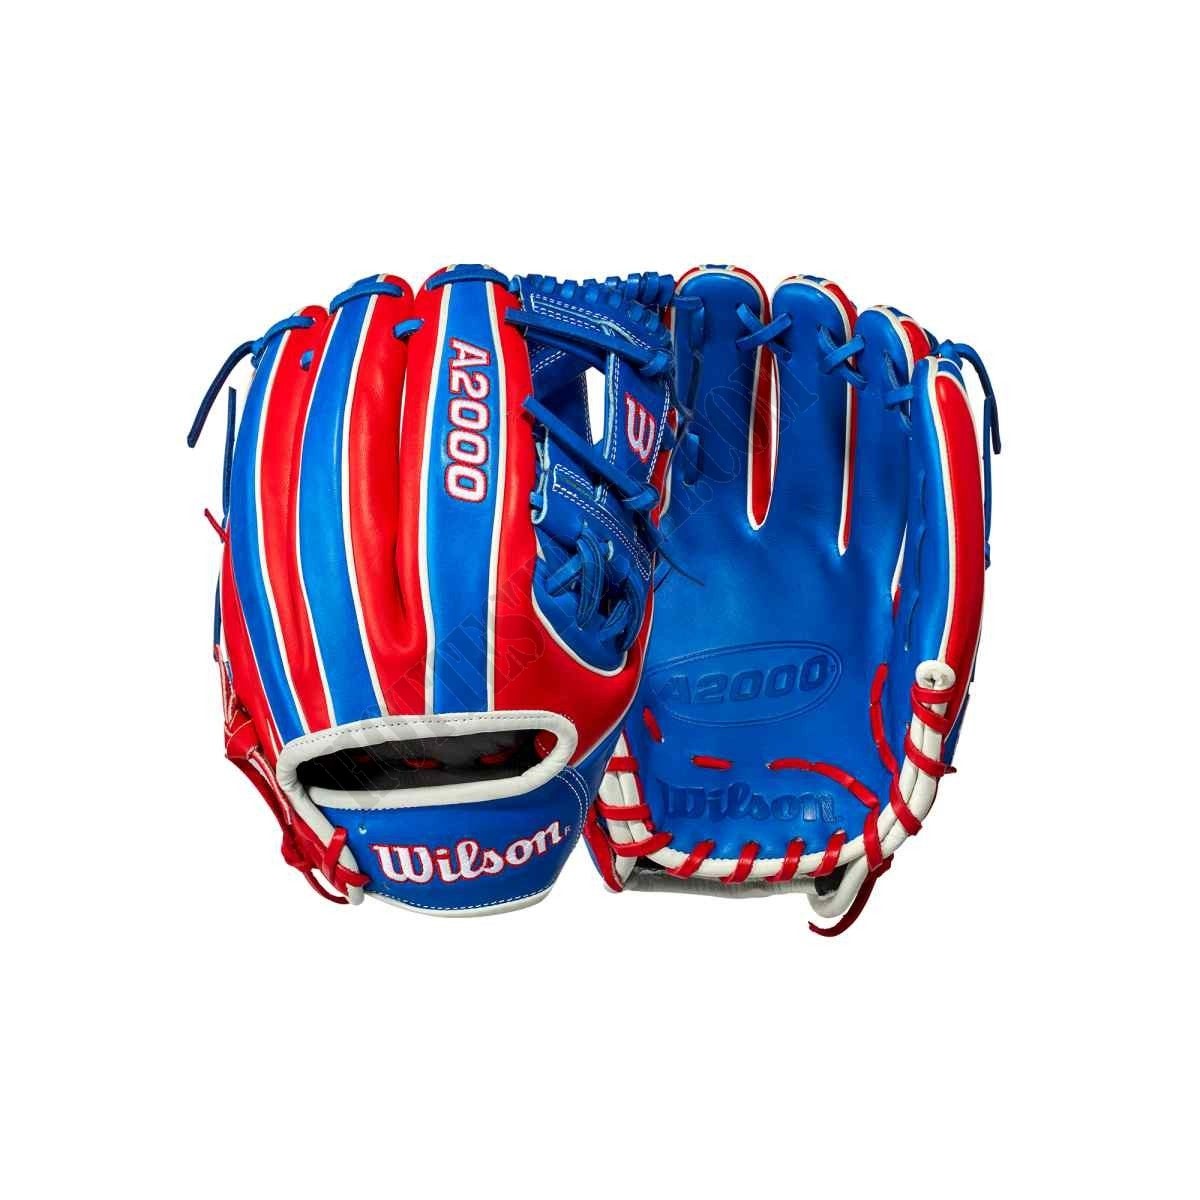 2021 A2000 1786 Dominican Republic 11.5" Infield Baseball Glove - Limited Edition ● Wilson Promotions - -0